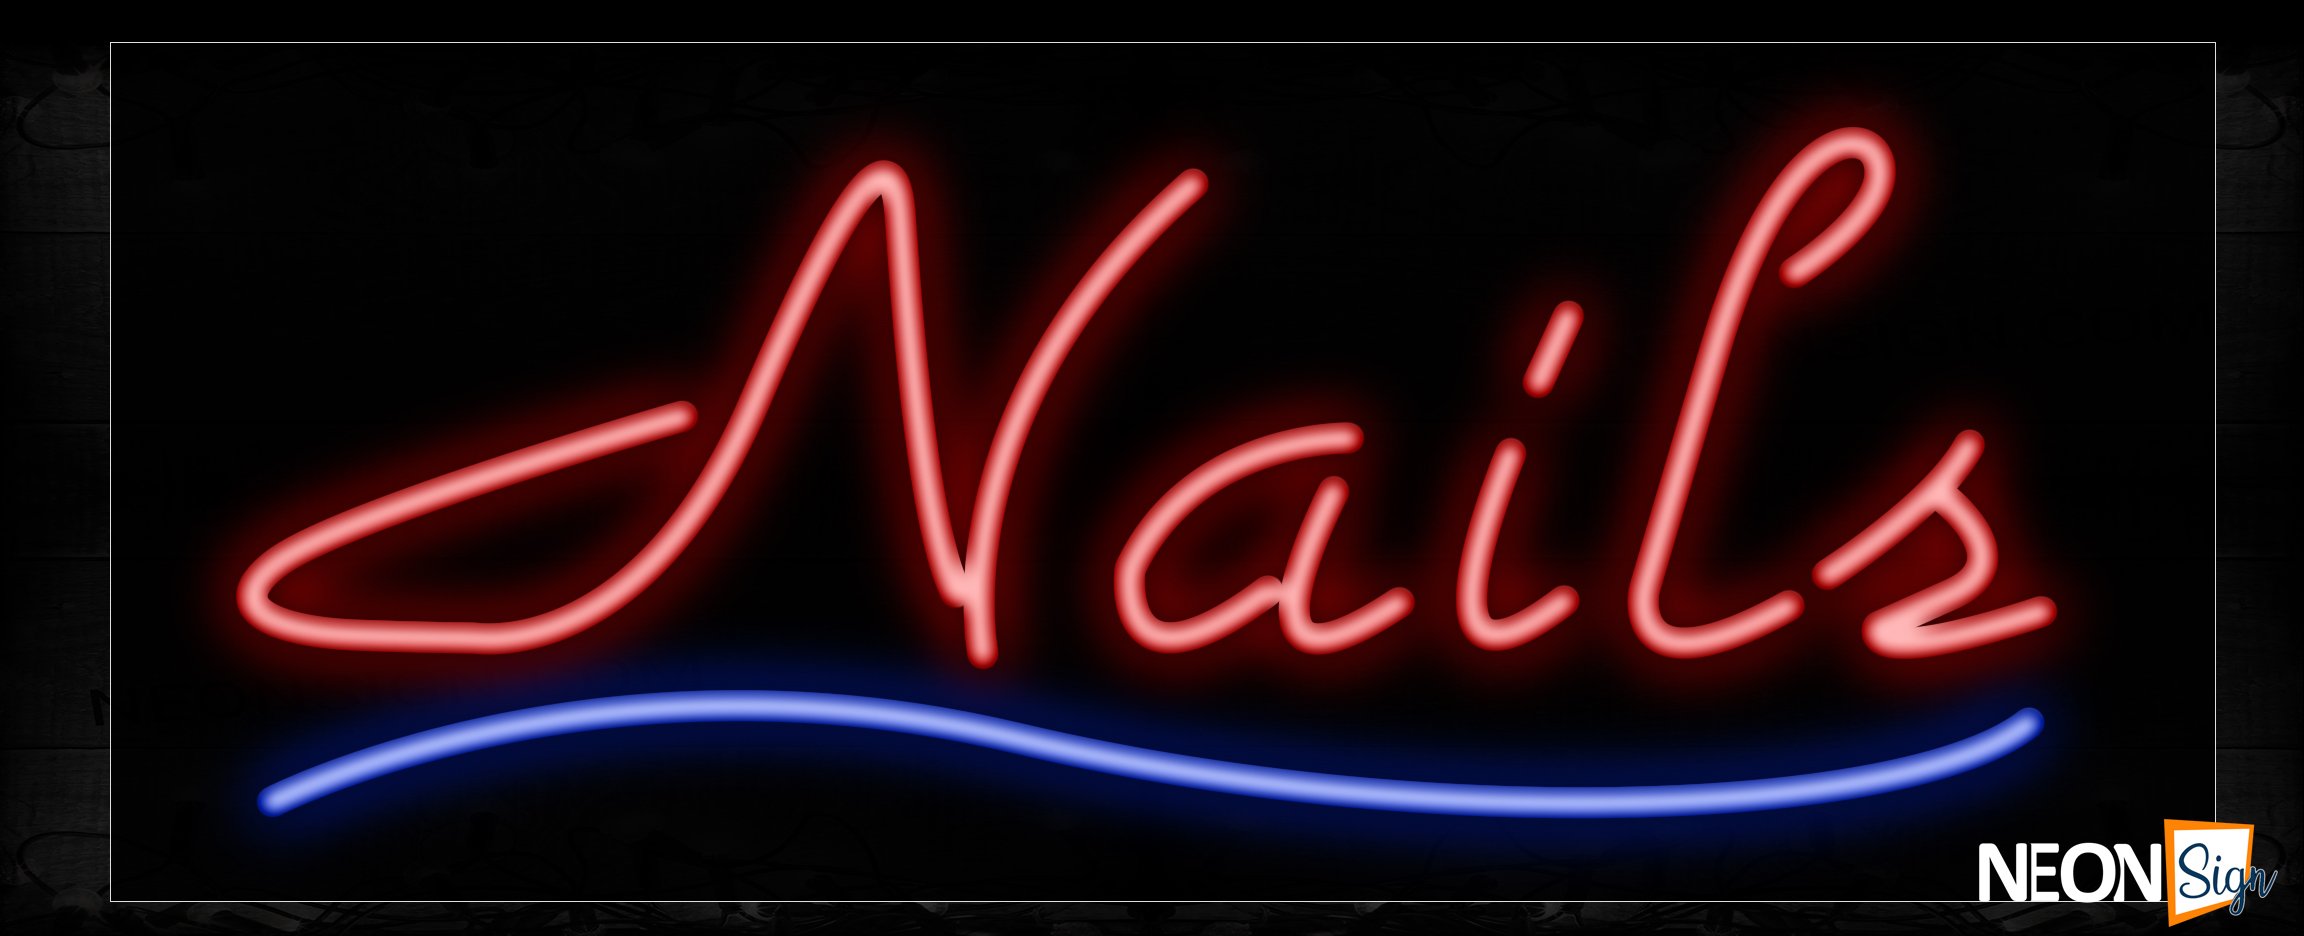 Image of Nails In Red With Blue Line Neon Sign